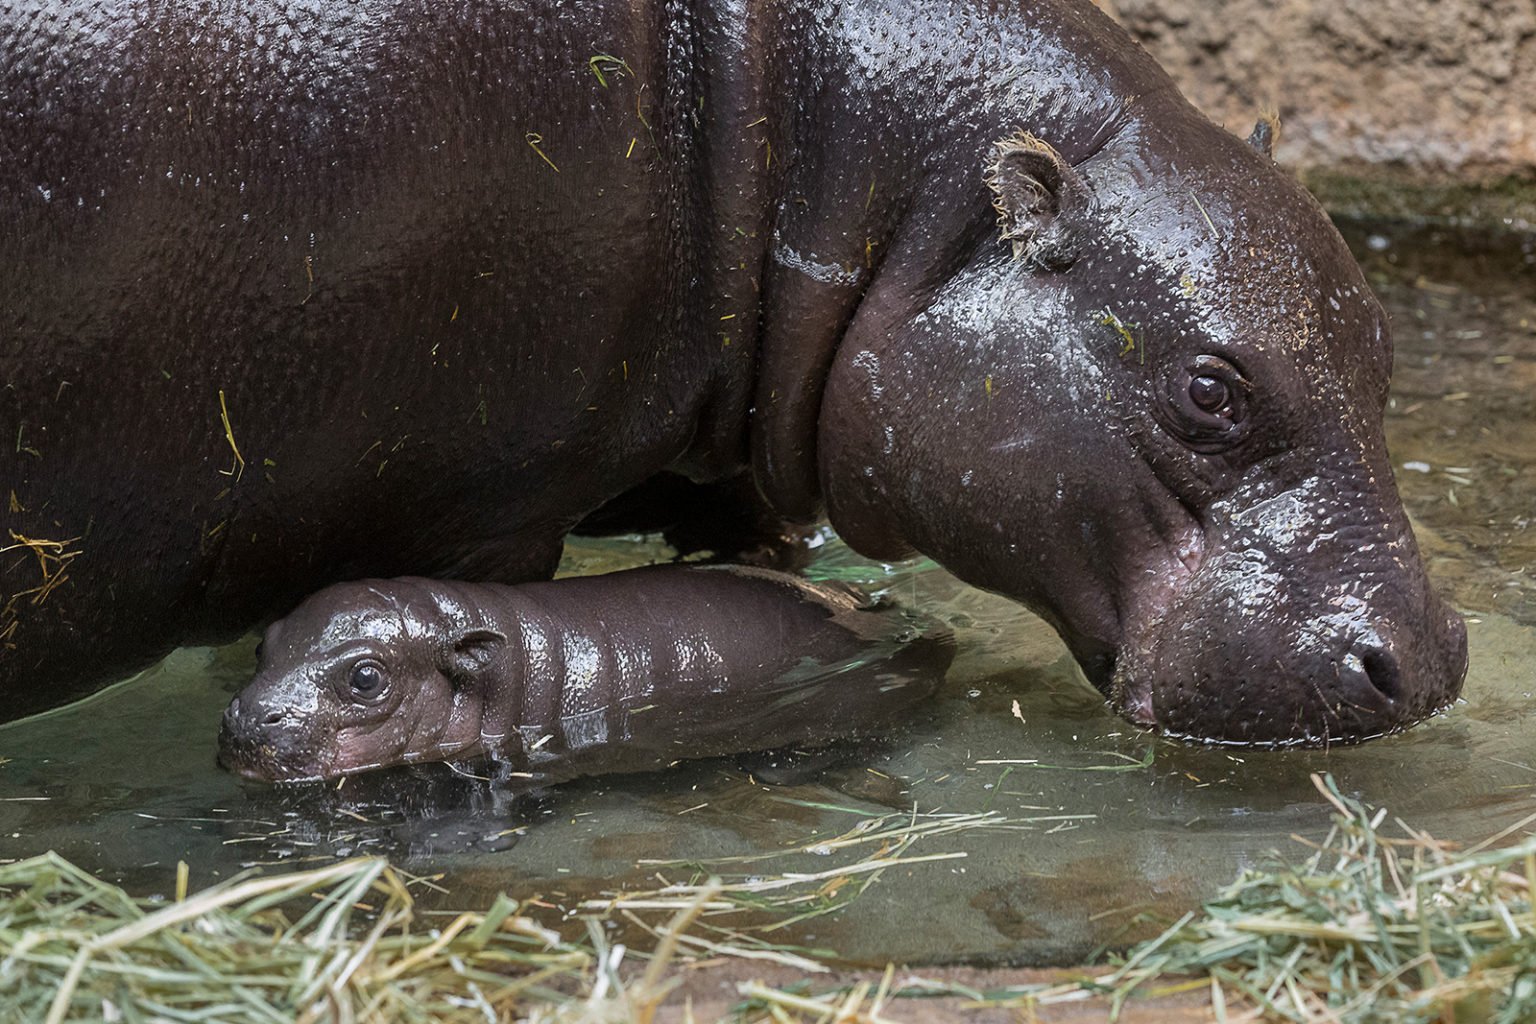 First Endangered Pygmy Hippo Born At San Diego Zoo In 30 Years